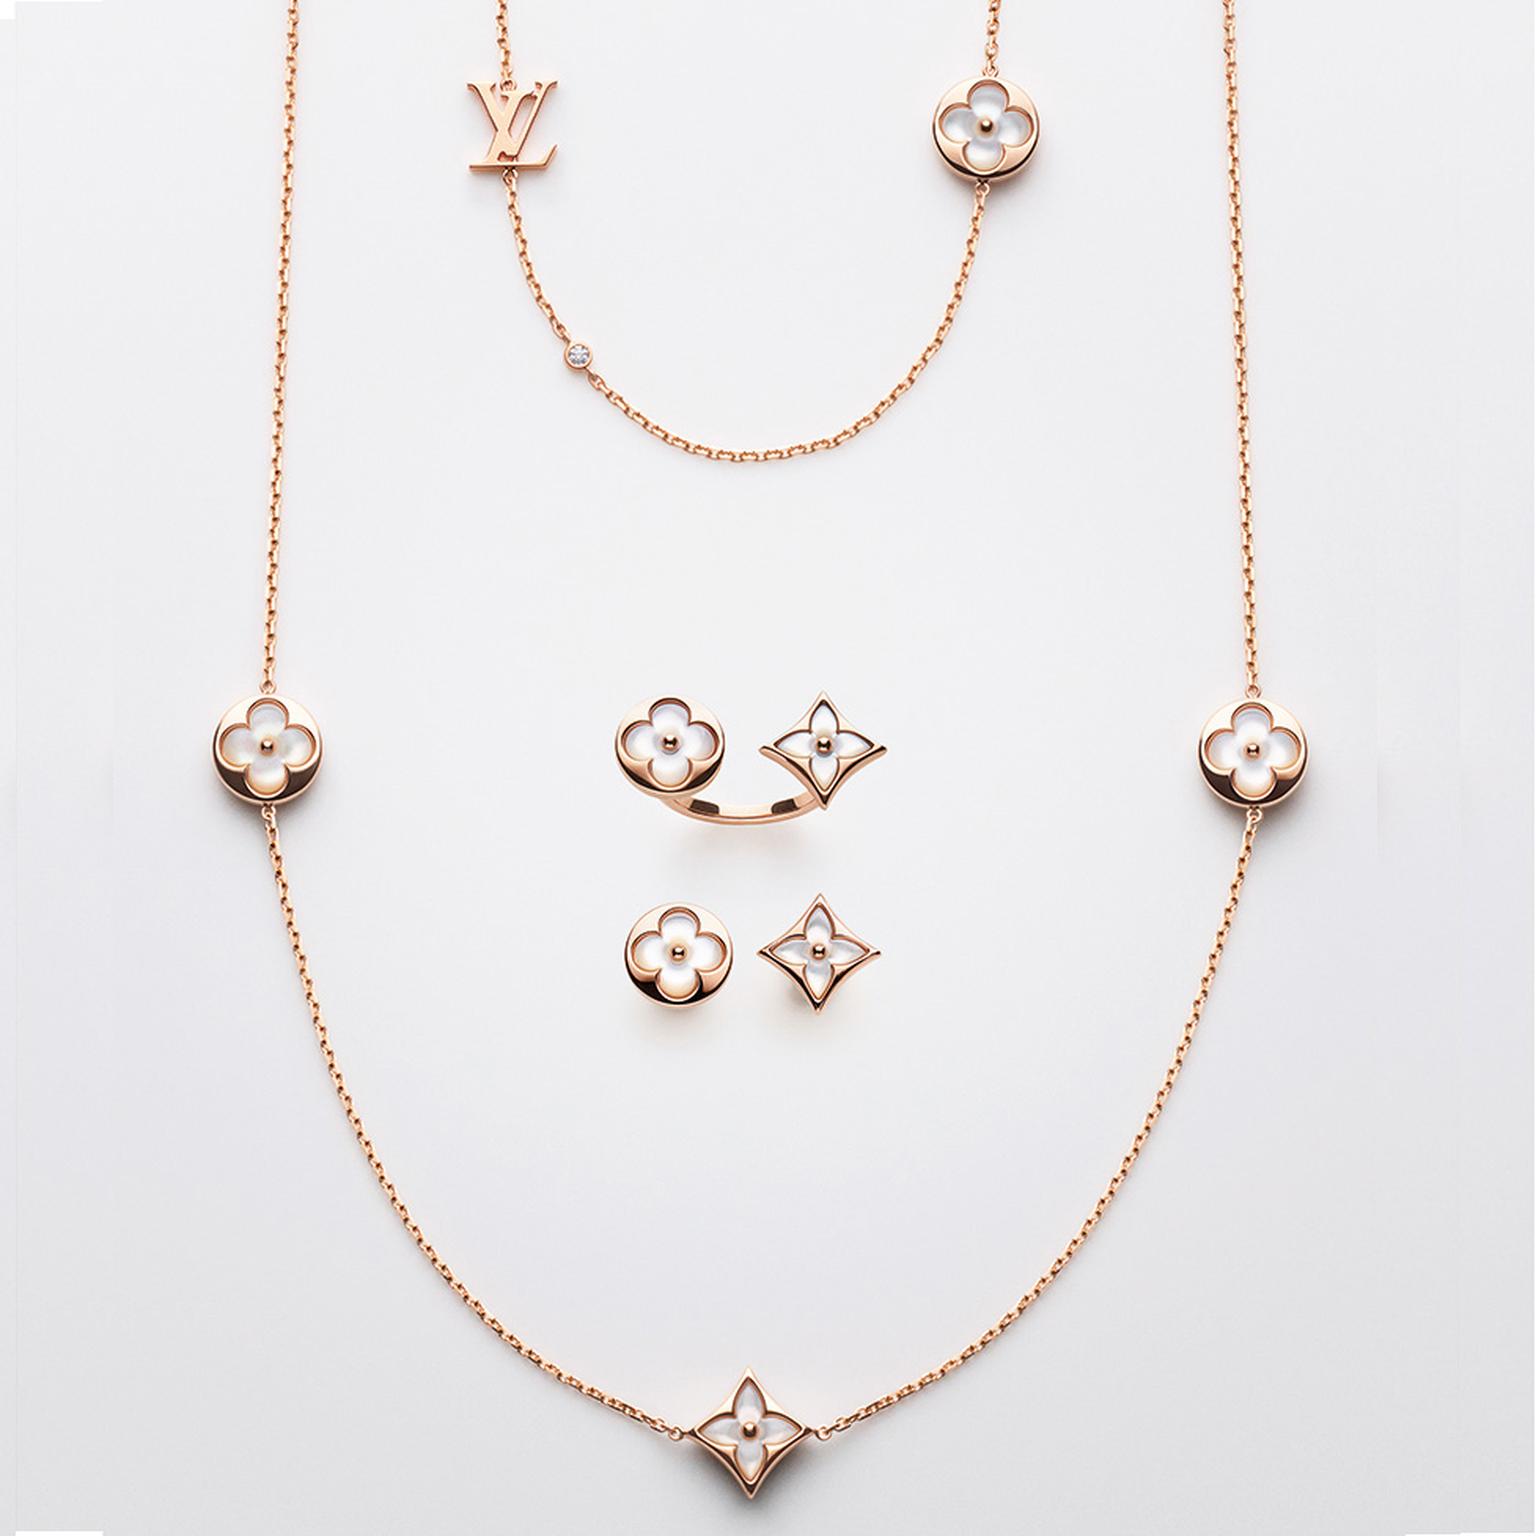 Color Blossom BB mother-of-pearl sautoir necklace | Louis Vuitton | The Jewellery Editor